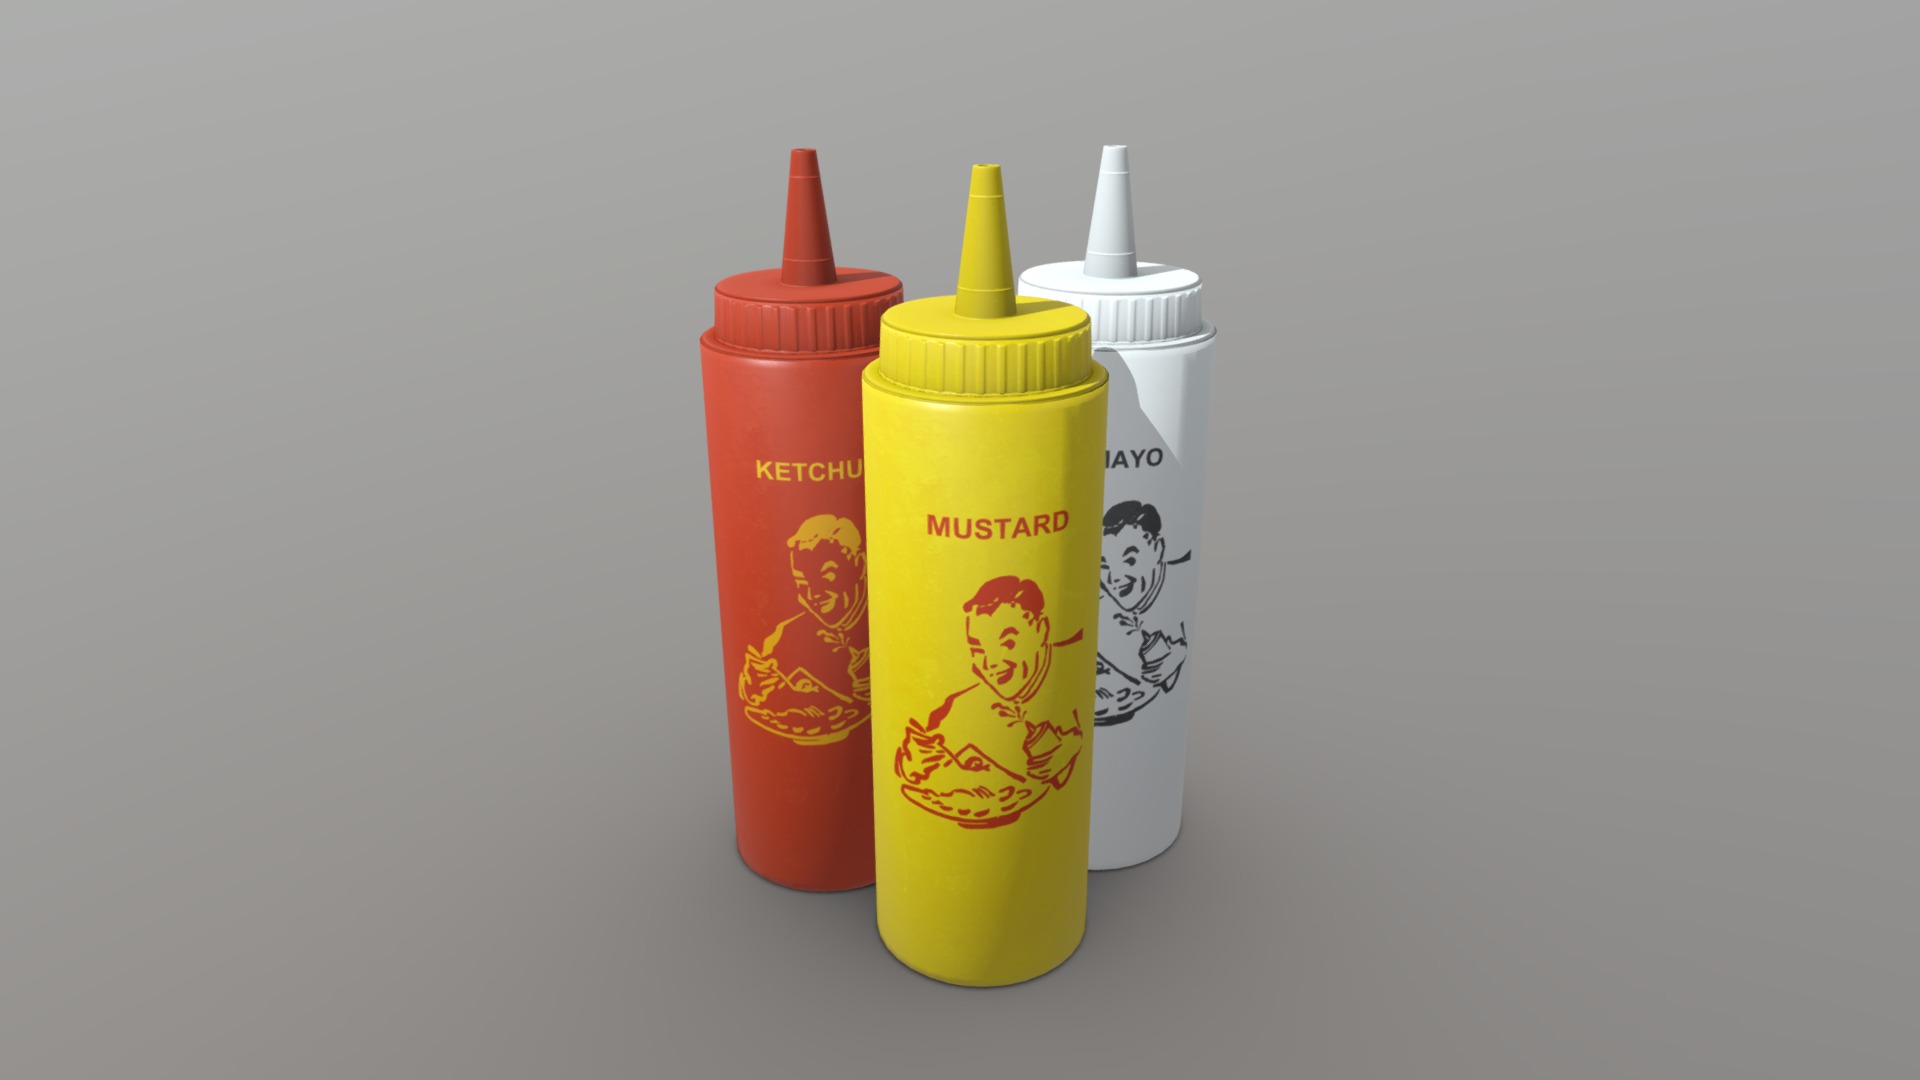 3D model Ketchup, Mustard and Mayo - This is a 3D model of the Ketchup, Mustard and Mayo. The 3D model is about a group of bottles.